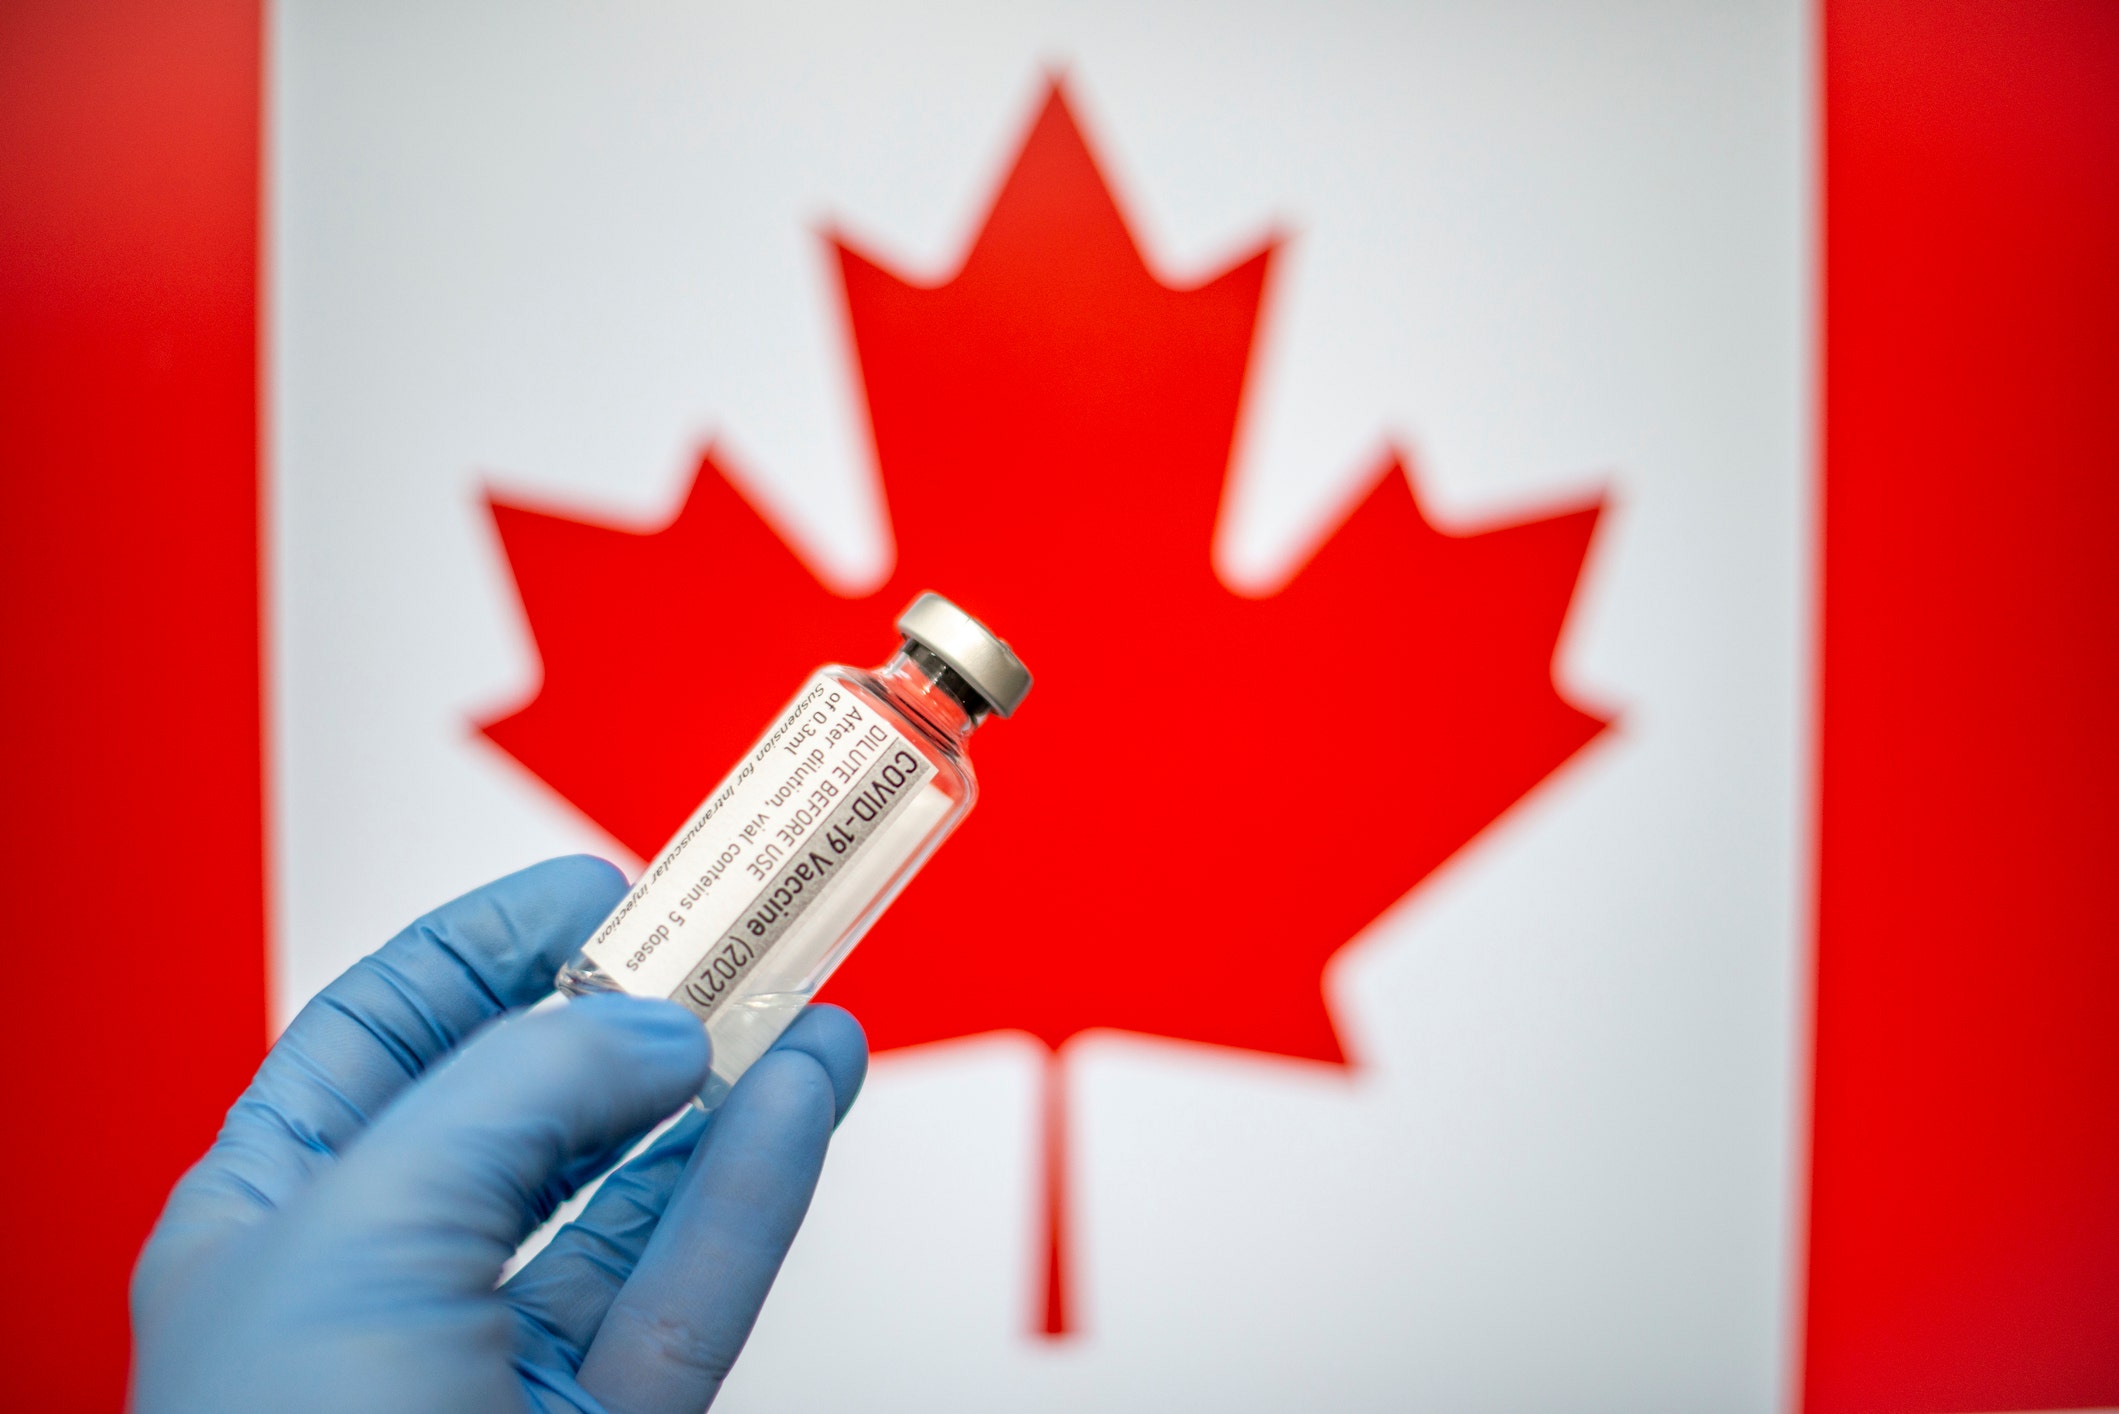 travelling to canada unvaccinated